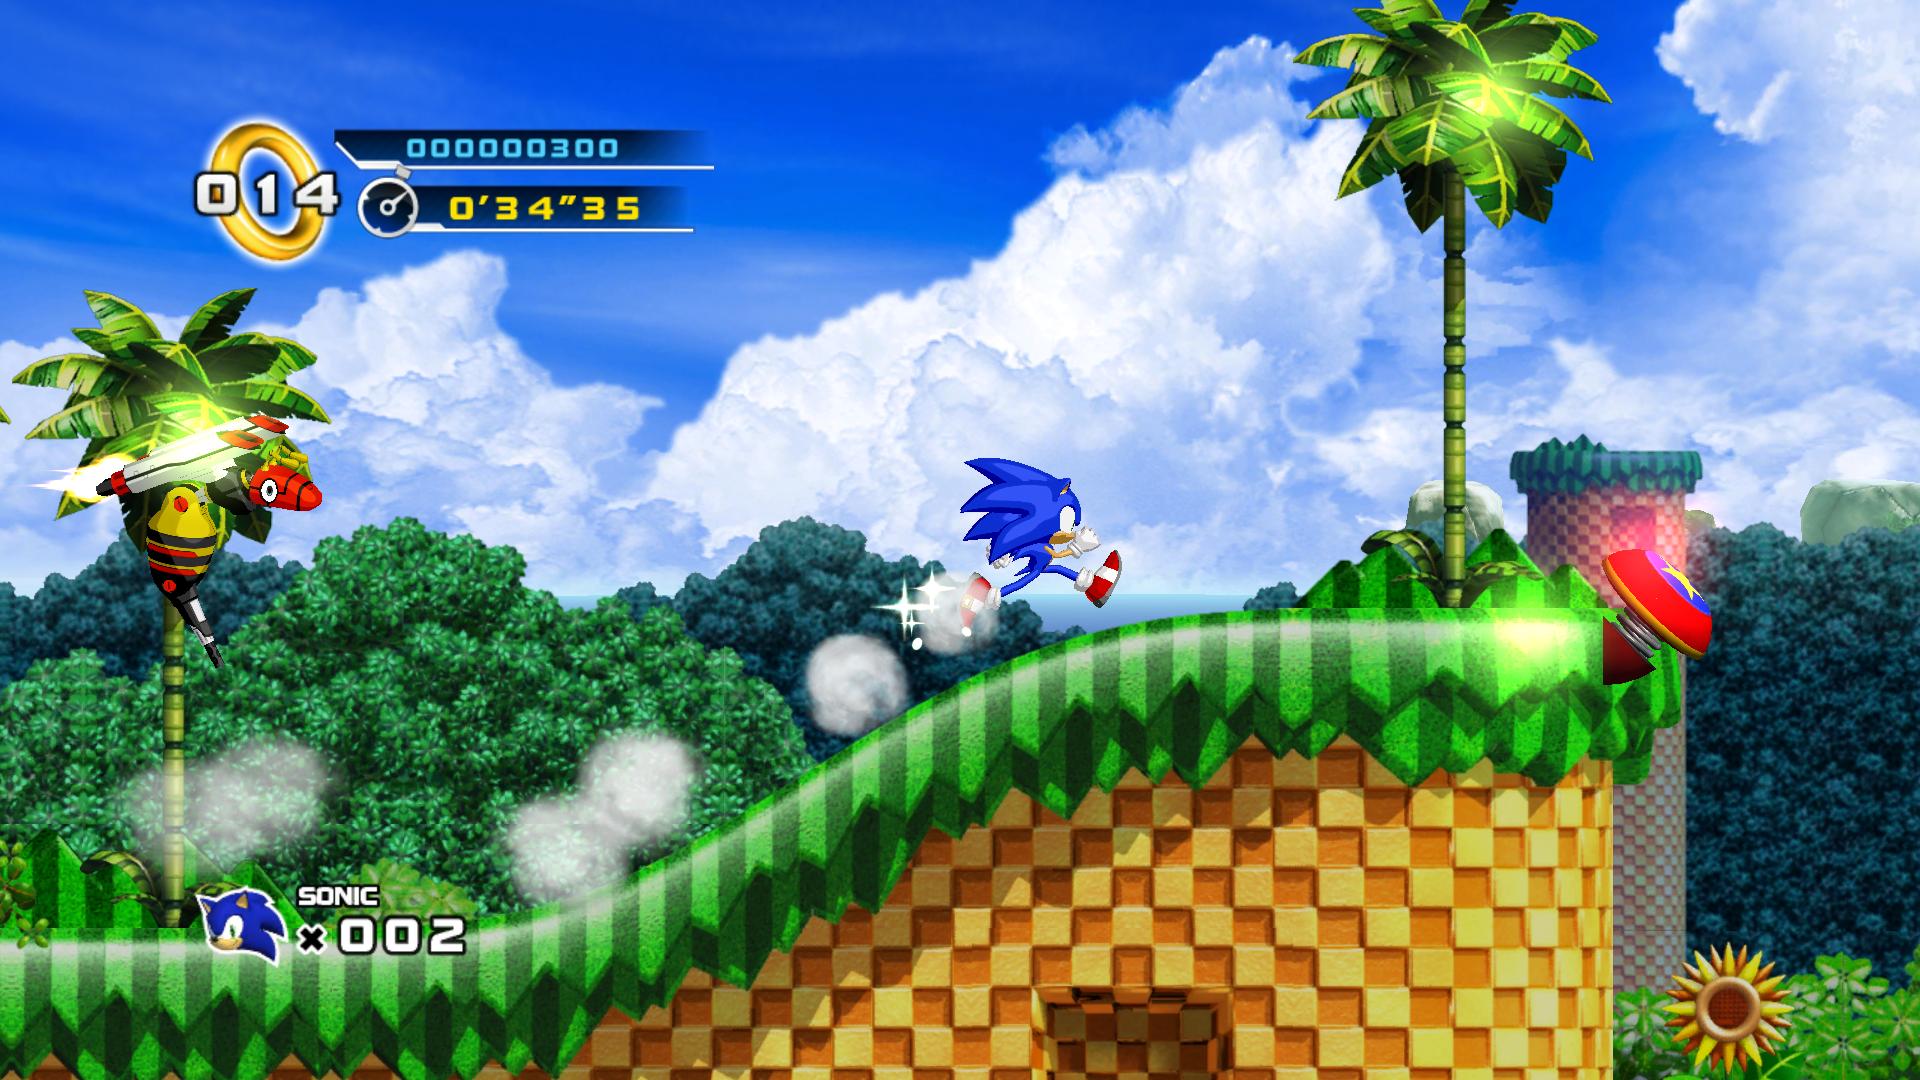 Green Hill Zone Act 1 - Sonic the Hedgehog [HD 1080p @ 60fps] 